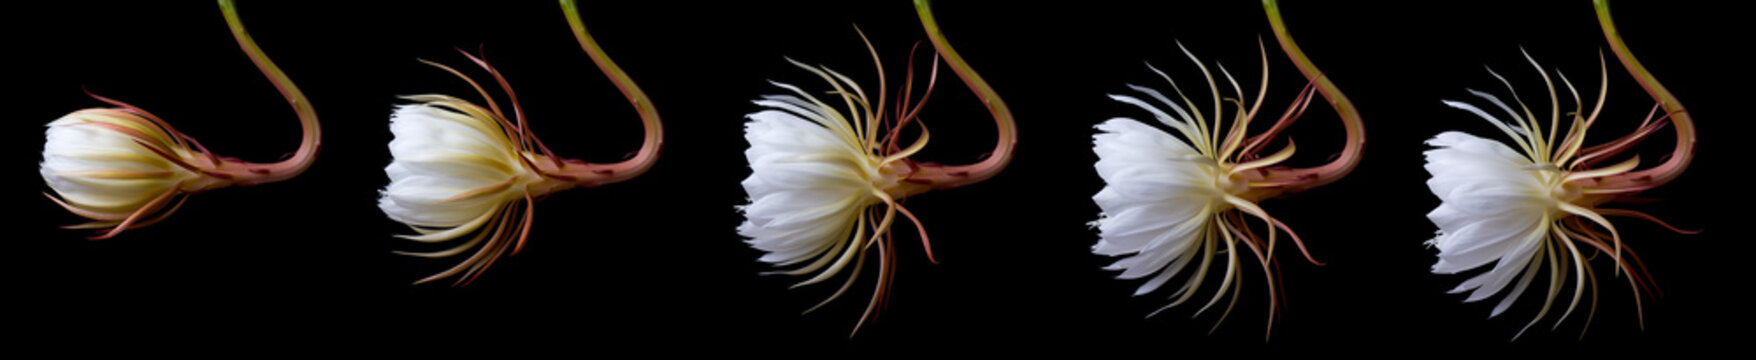 time lapse of night-blooming cereus flower isolated on black background, aka queen of the night, bud to fully bloomed, unique rarely blooms and only at night princess of the night cactus plant